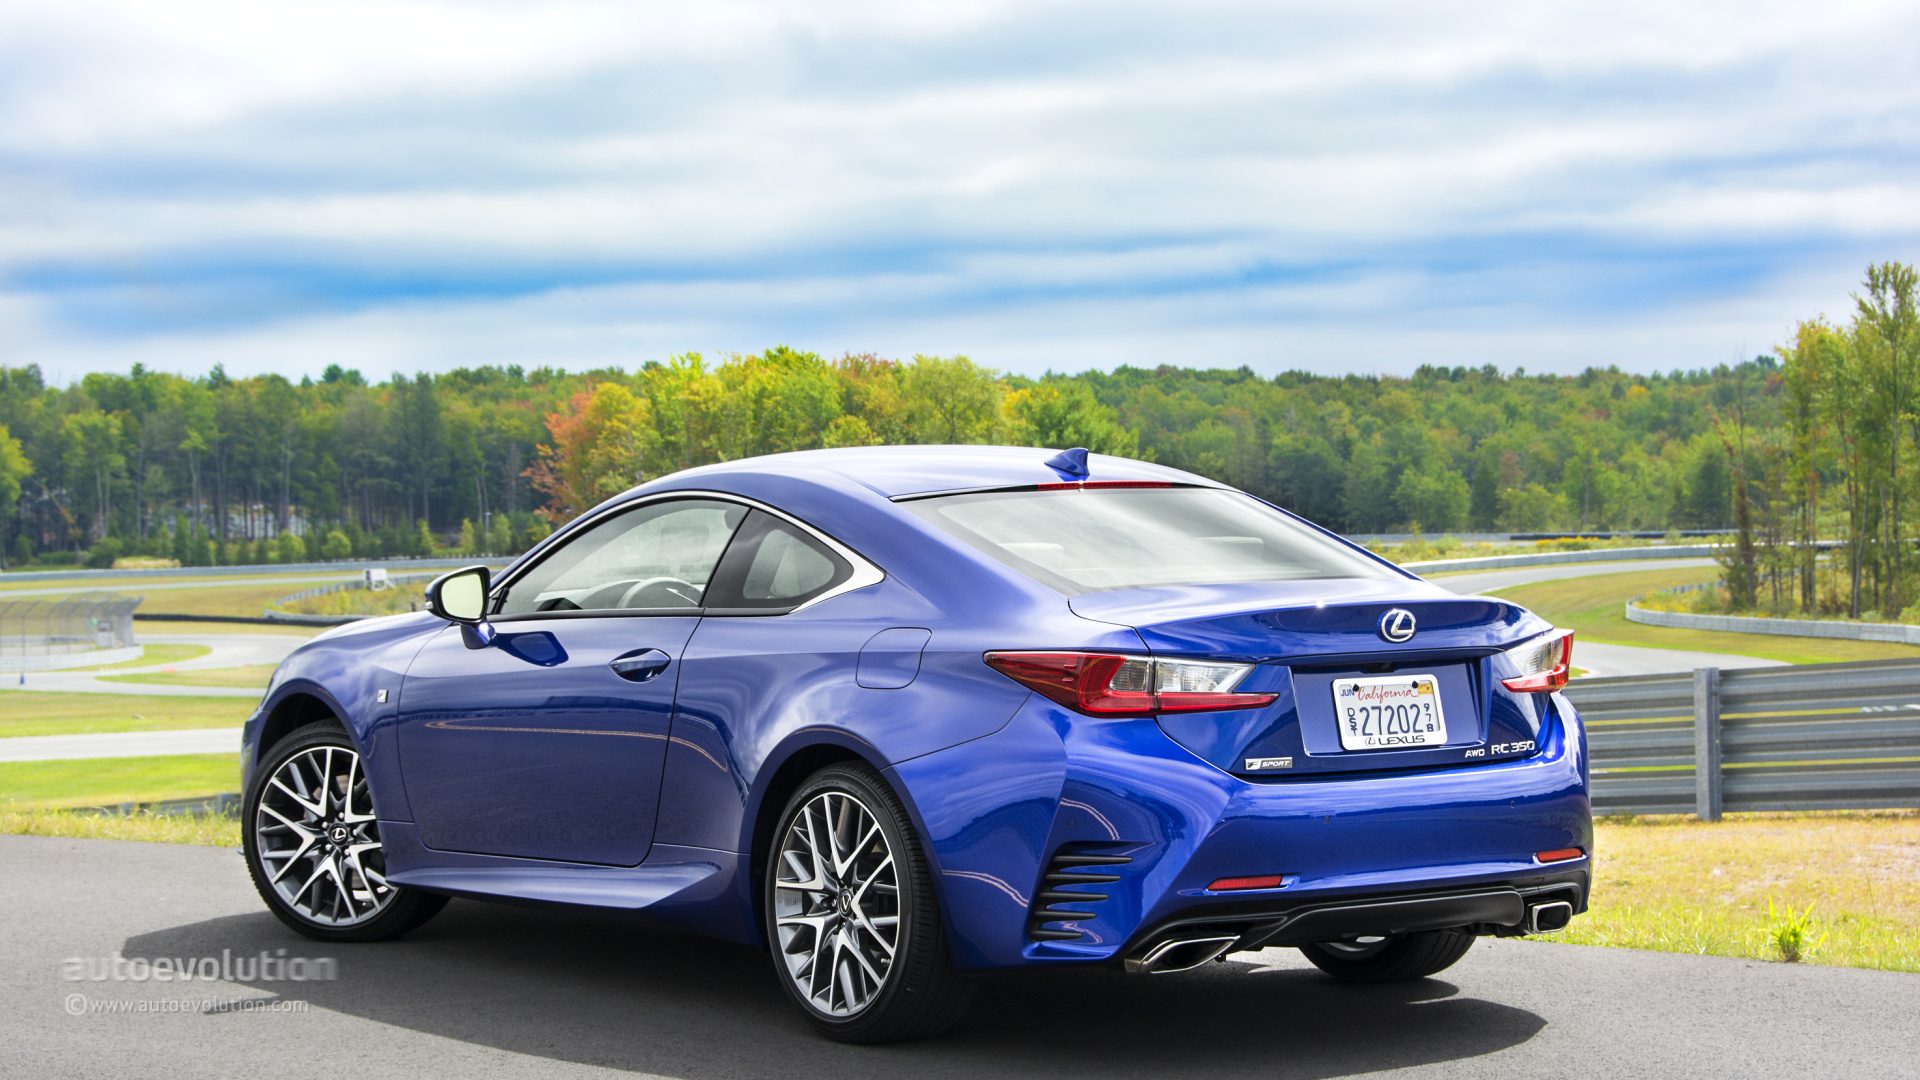 59 Top Images Lexus Rc F Sport Specs : Lexus RC 350 F-Sport - Specs and Pricing - Cars.co.za